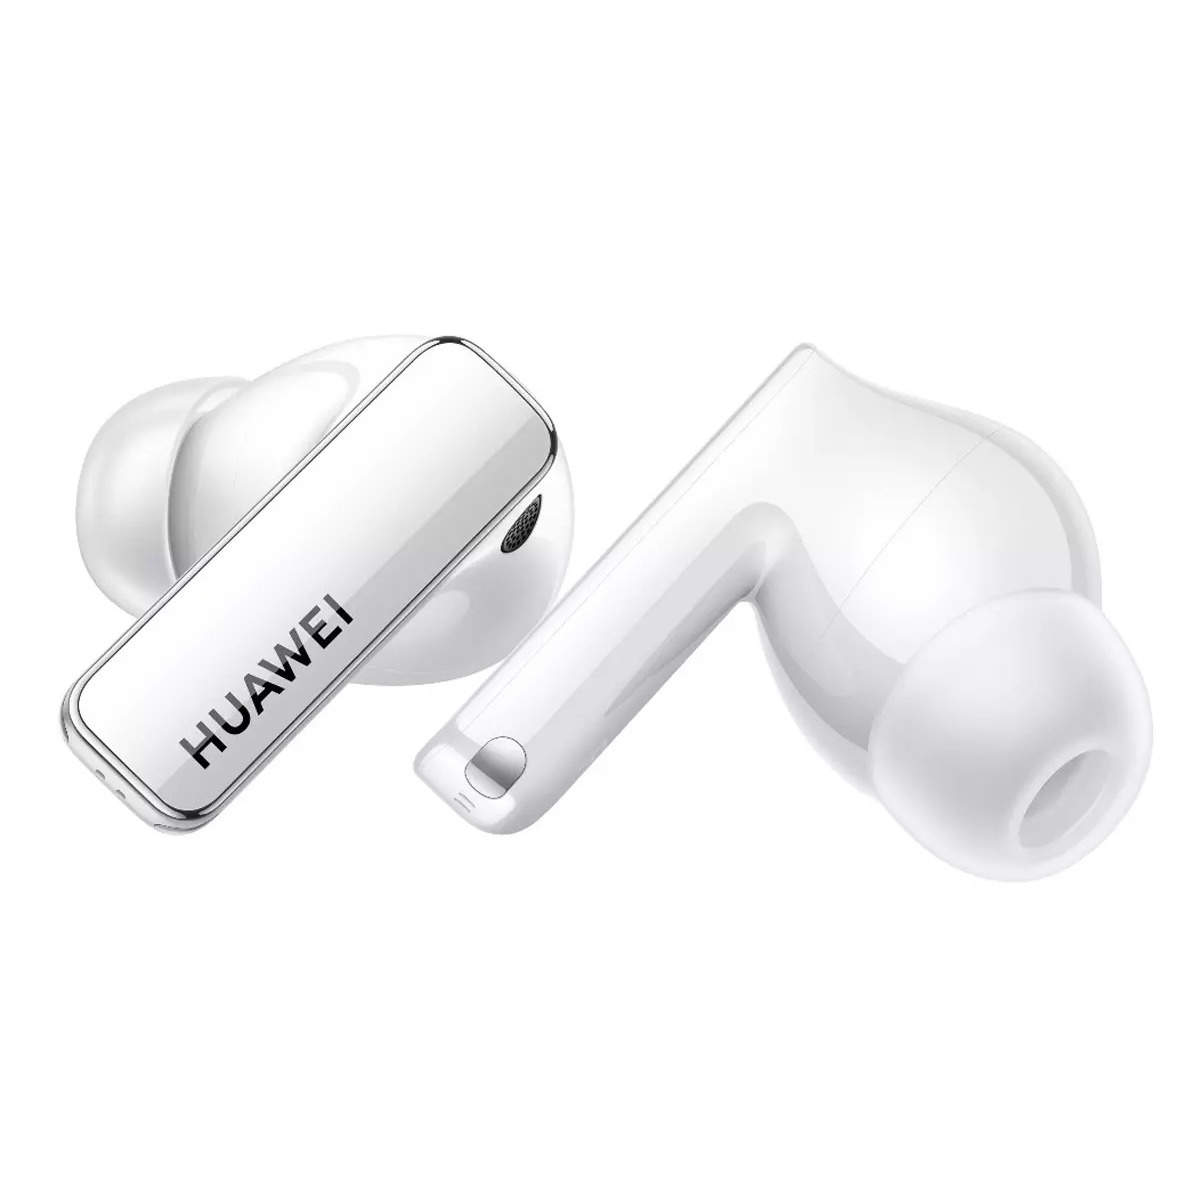 CityLink - Huawei FreeBuds Pro 3 Bluetooth Earbuds Authorized Goods (3  Color) - 18 months warranty Mobile Phone Only - CityLink